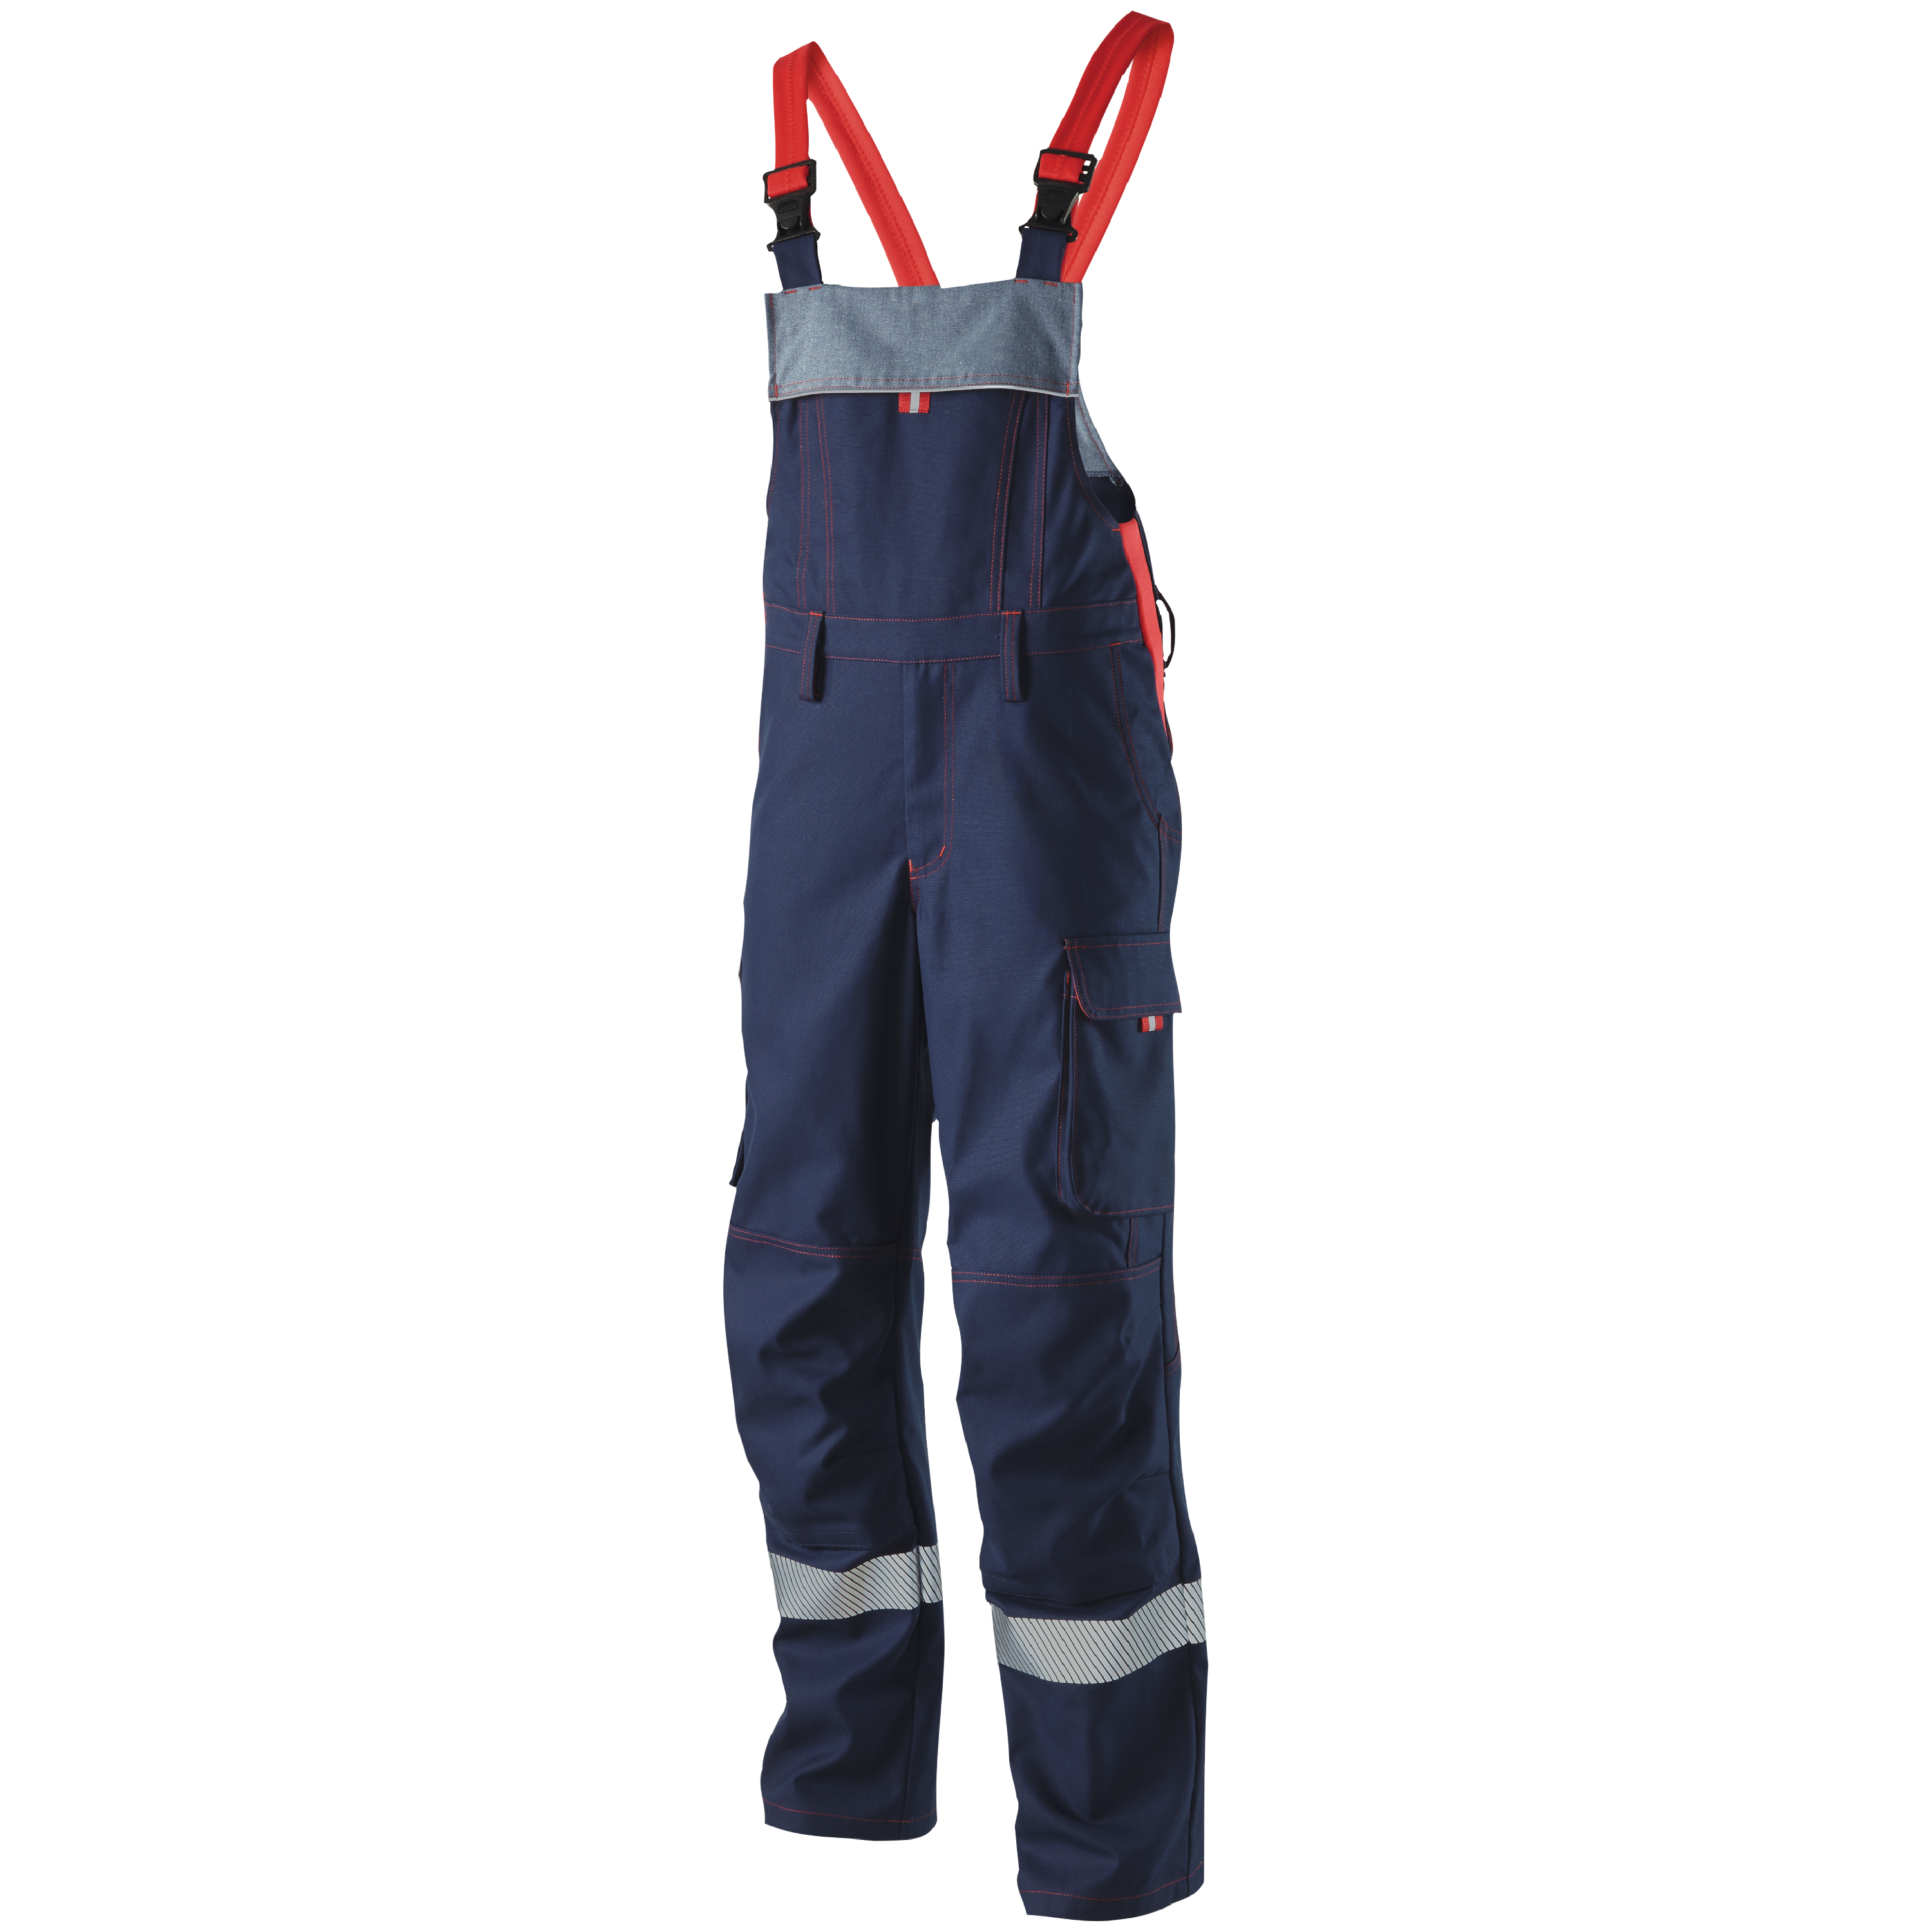 CWS Metaller Dungarees DarkBlue/Grey/Red w/ Reflective Band w/ Kneepad Pockets